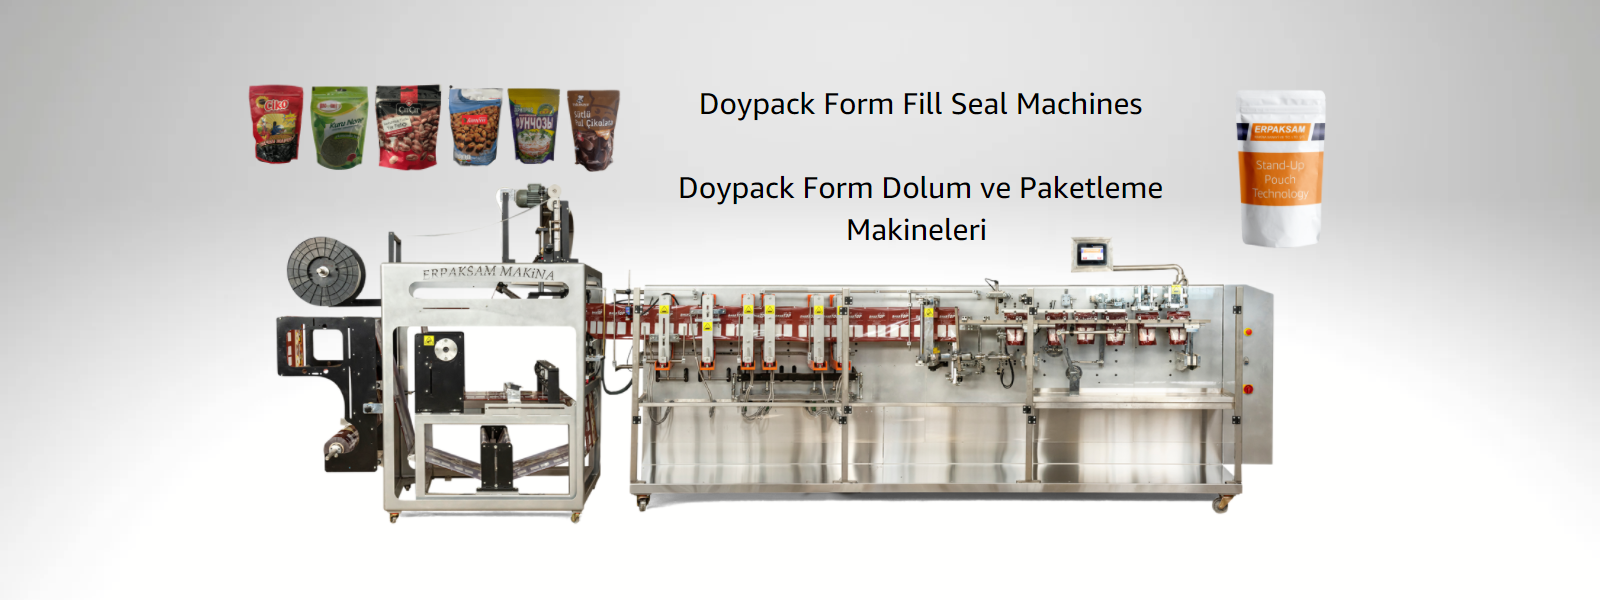 Fully Automatic Horizontal Doypack Form Fill Seal Machine